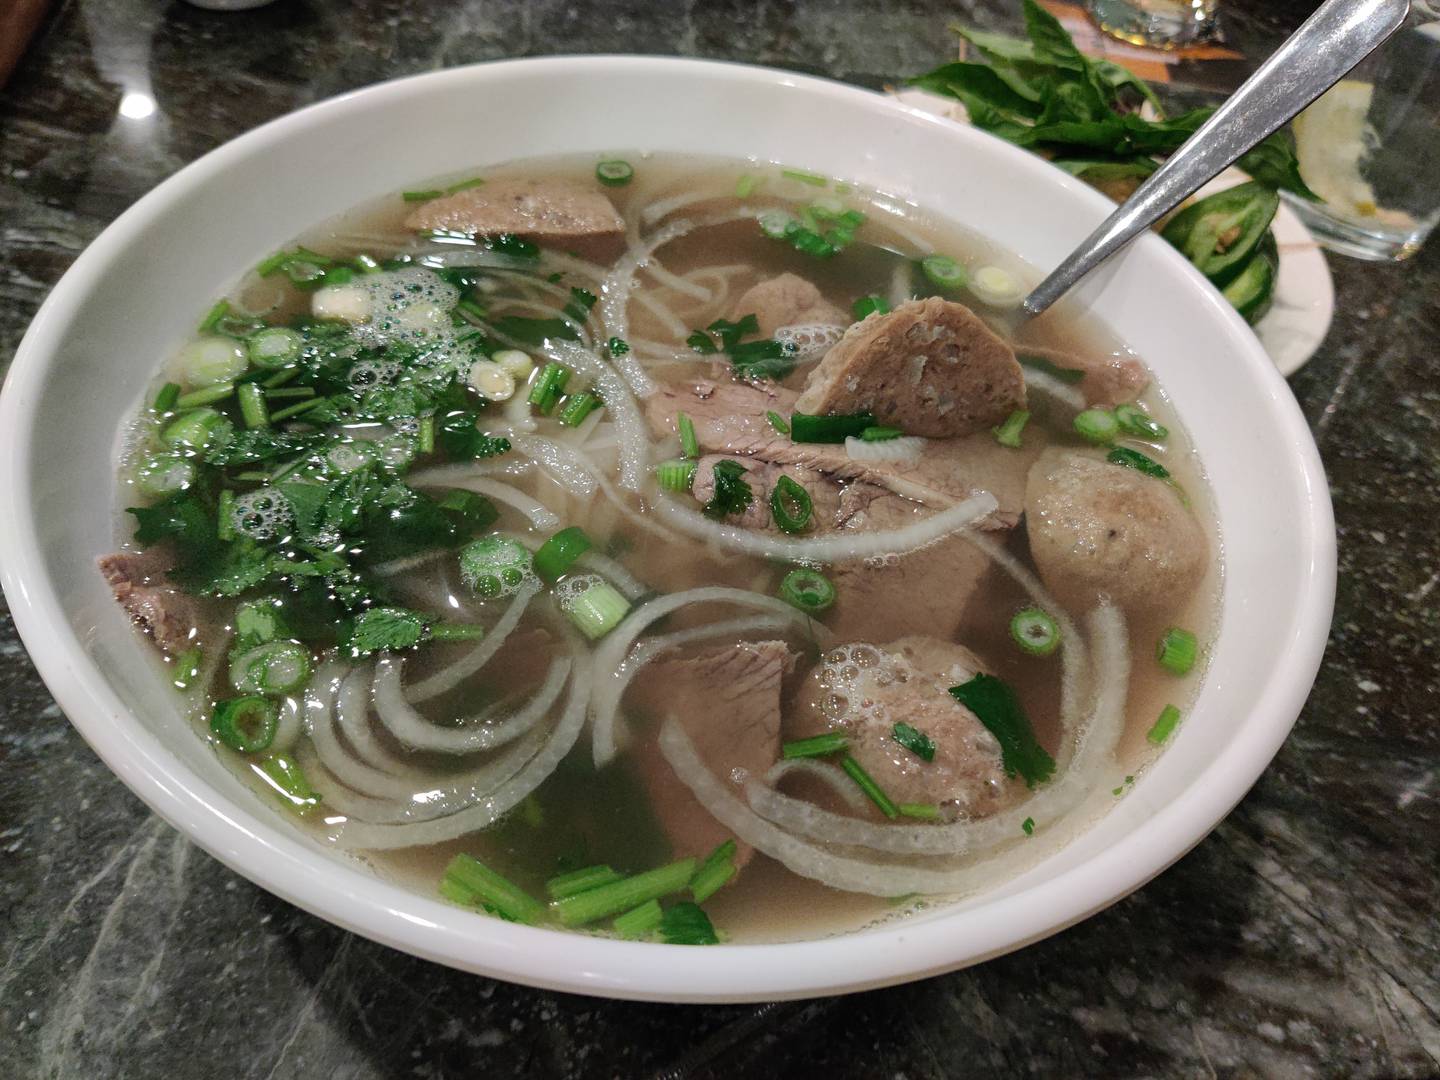 The Vietnamese restaurant Pho Xich Lo in Geneva serves a pho special soup.